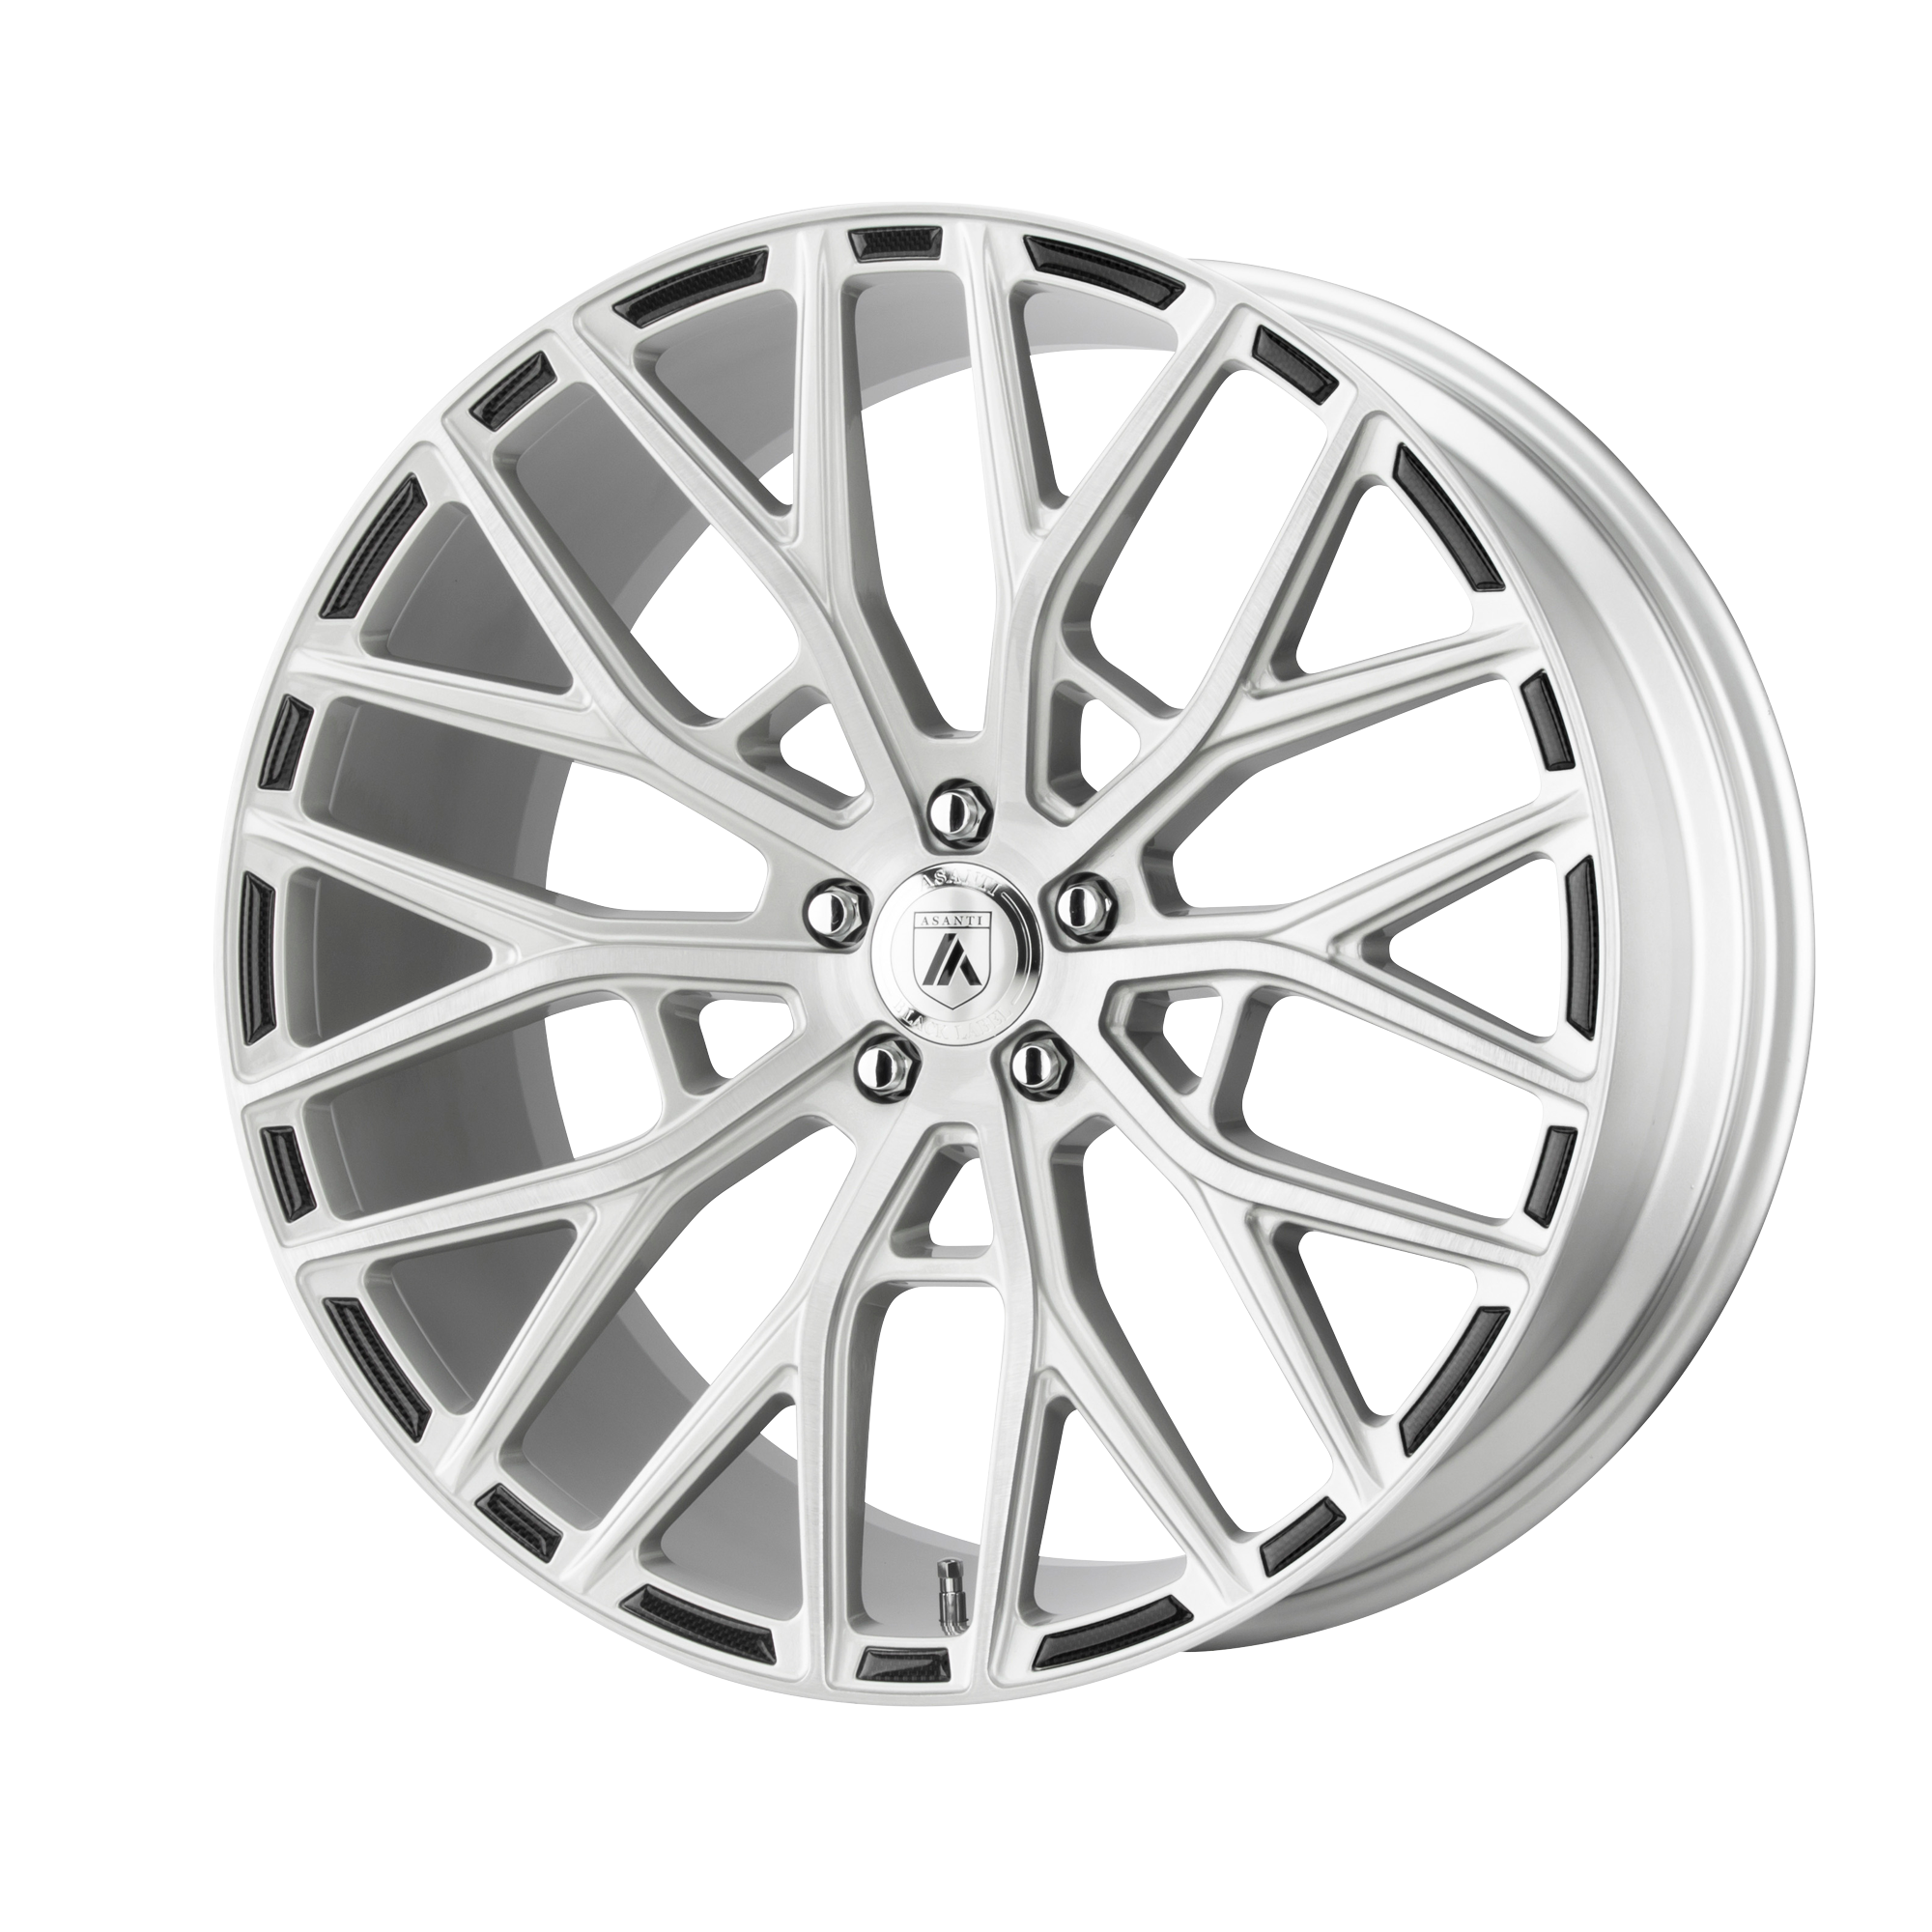 LEO 20x8.5 5x114.30 BRUSHED SILVER (38 mm) - Tires and Engine Performance